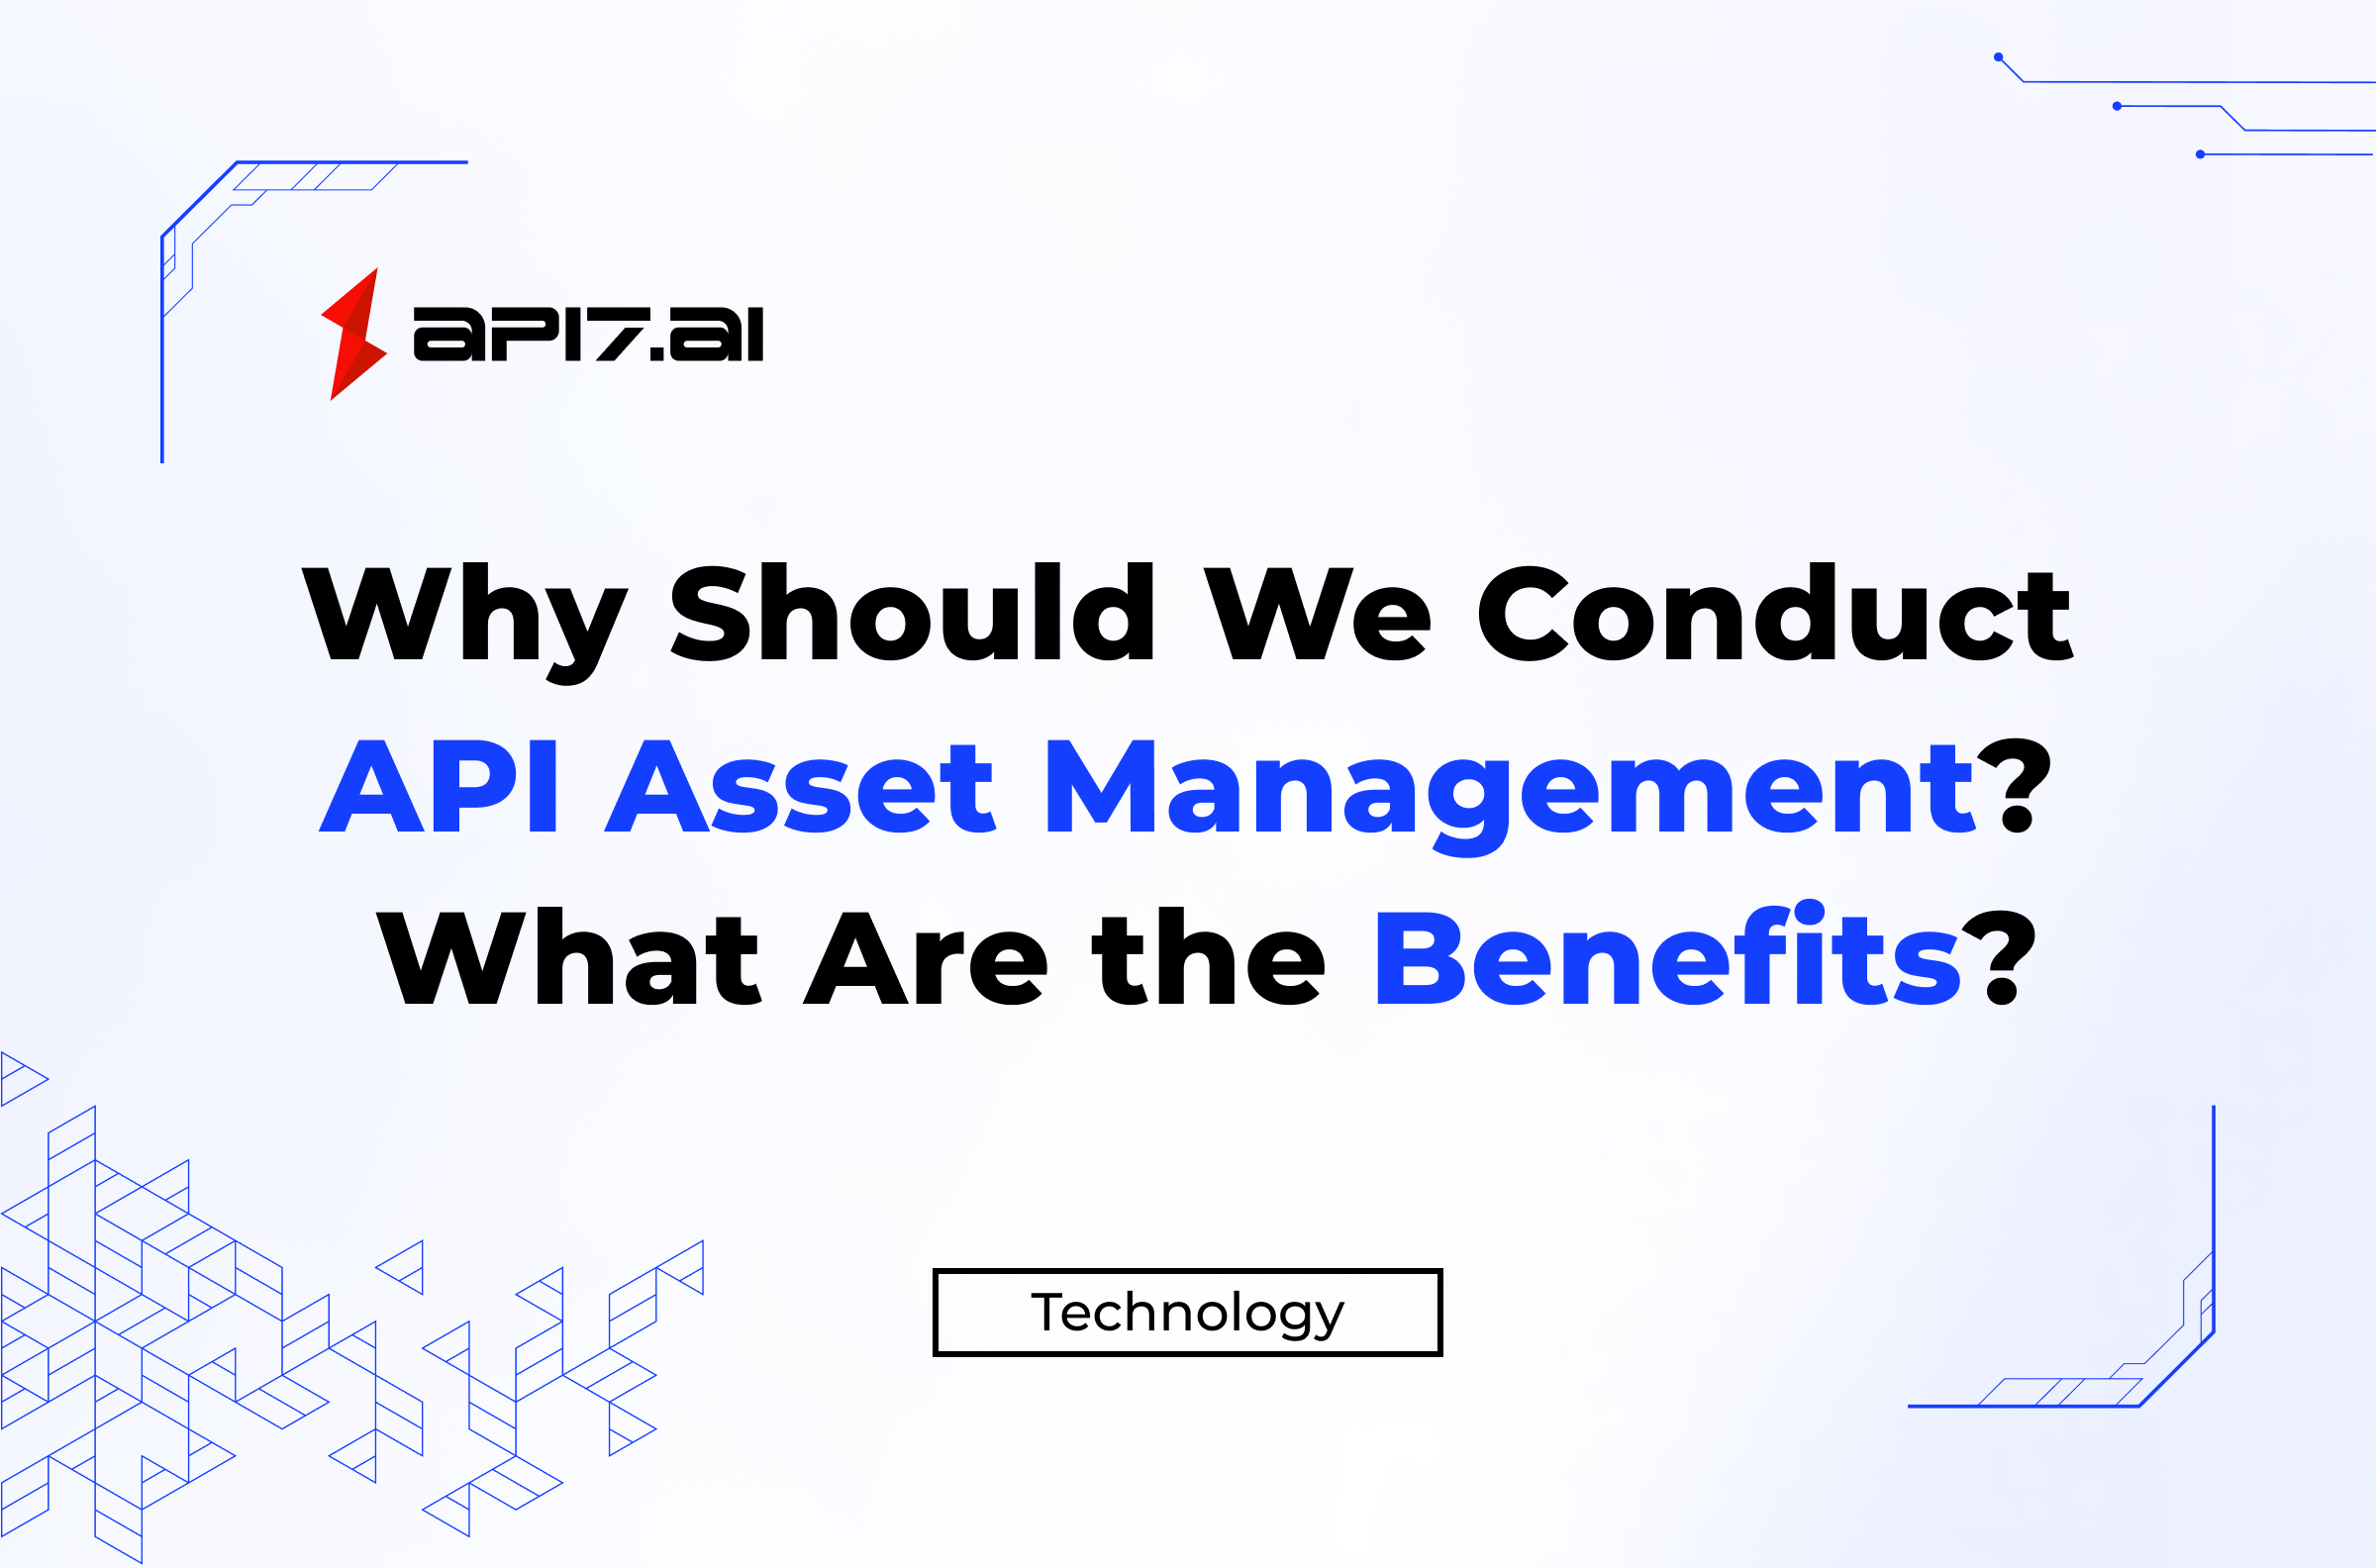 Why Should We Conduct API Asset Management? What Are the Benefits?